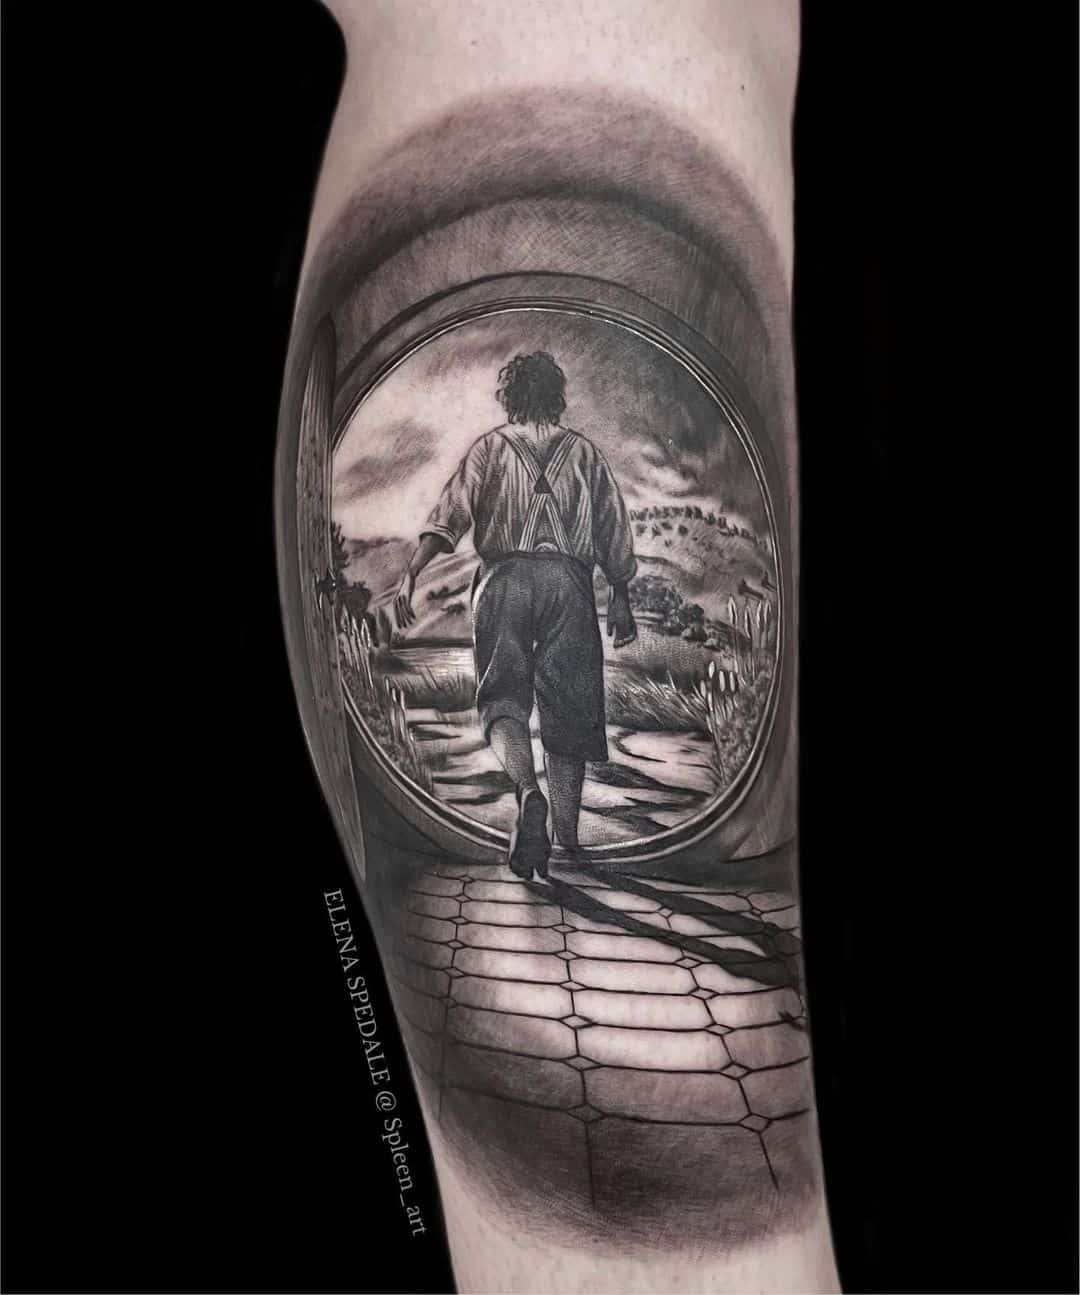 Black And White Realistic Tattoo Designs by Elena Spedale